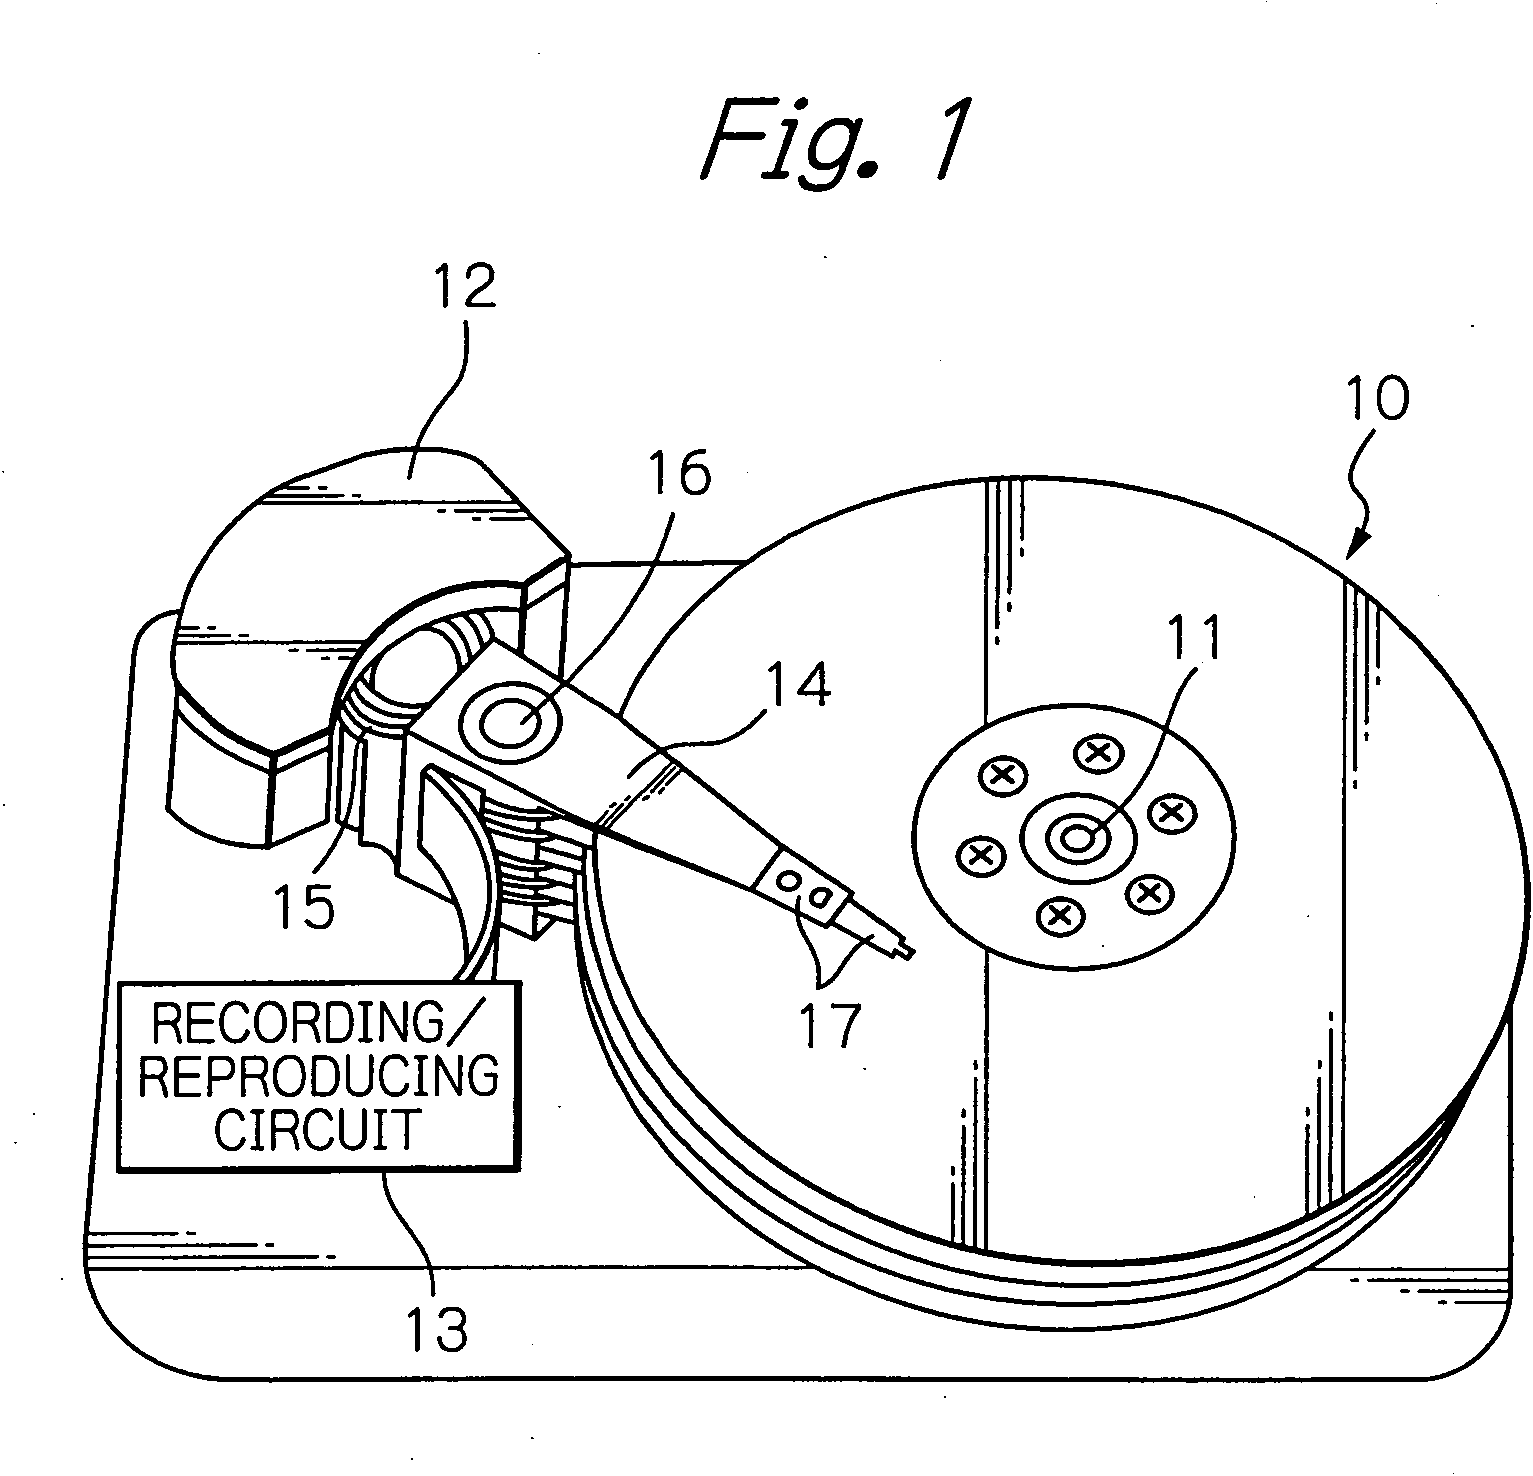 Thin-film magnetic head with heater for adjusting magnetic spacing